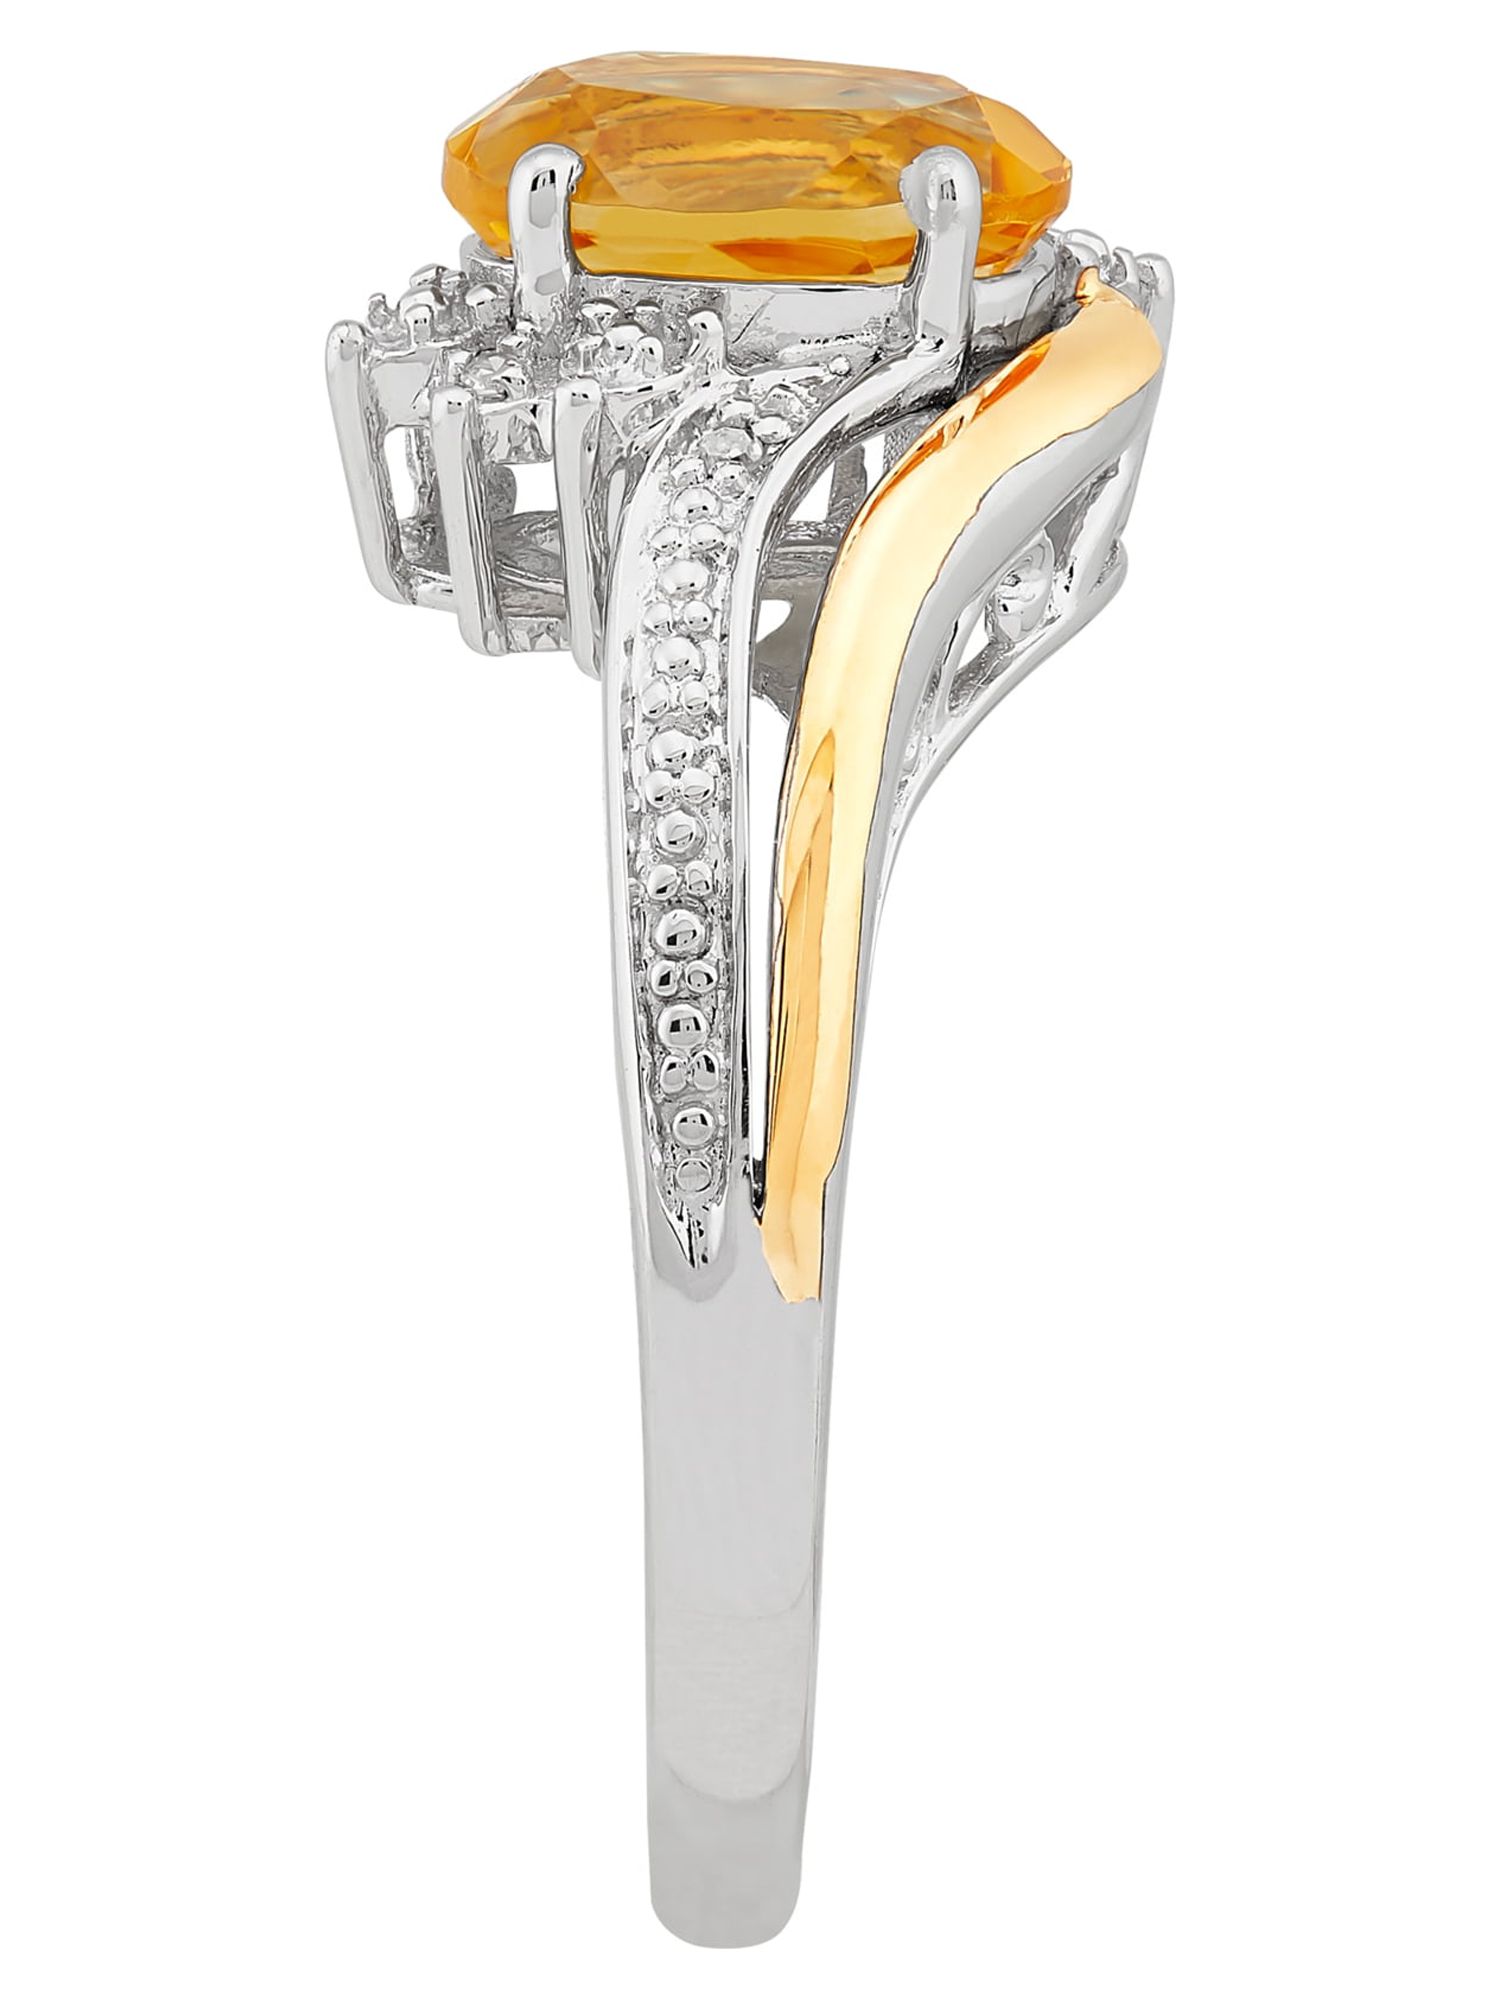 Brilliance Fine Jewelry Genuine Citrine Diamond Accent Ring in Sterling Silver and 10K Yellow Gold - image 3 of 4